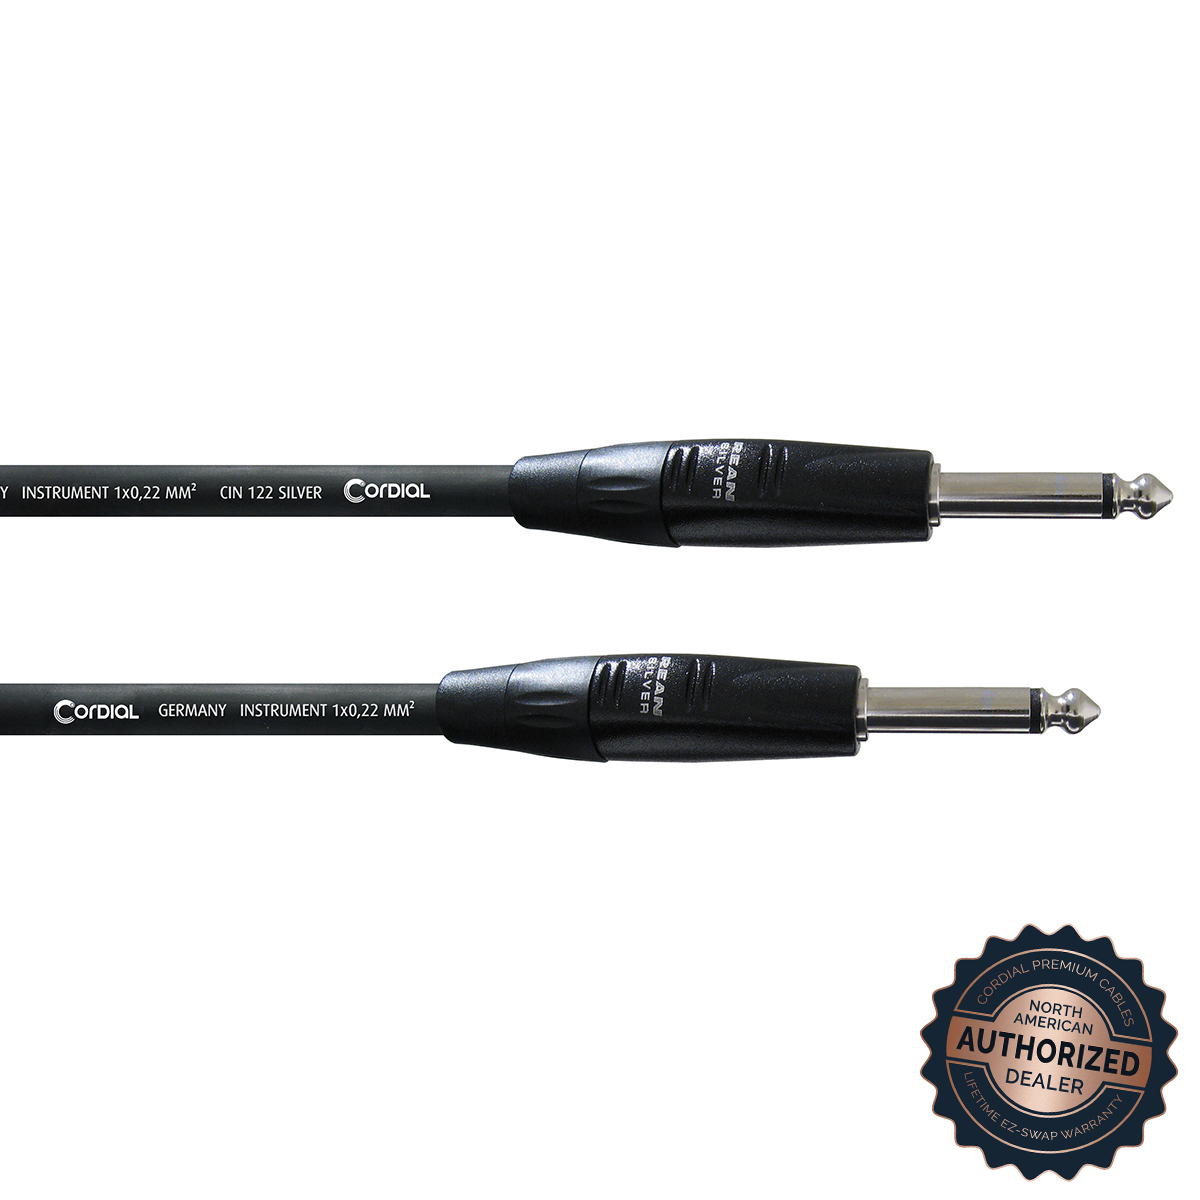 Cordial Guitar / Instrument Cable; 5ft.

SKU: CII 1.5 PP

1/4" TS Male to 1/4" TS Male; 5ft. 